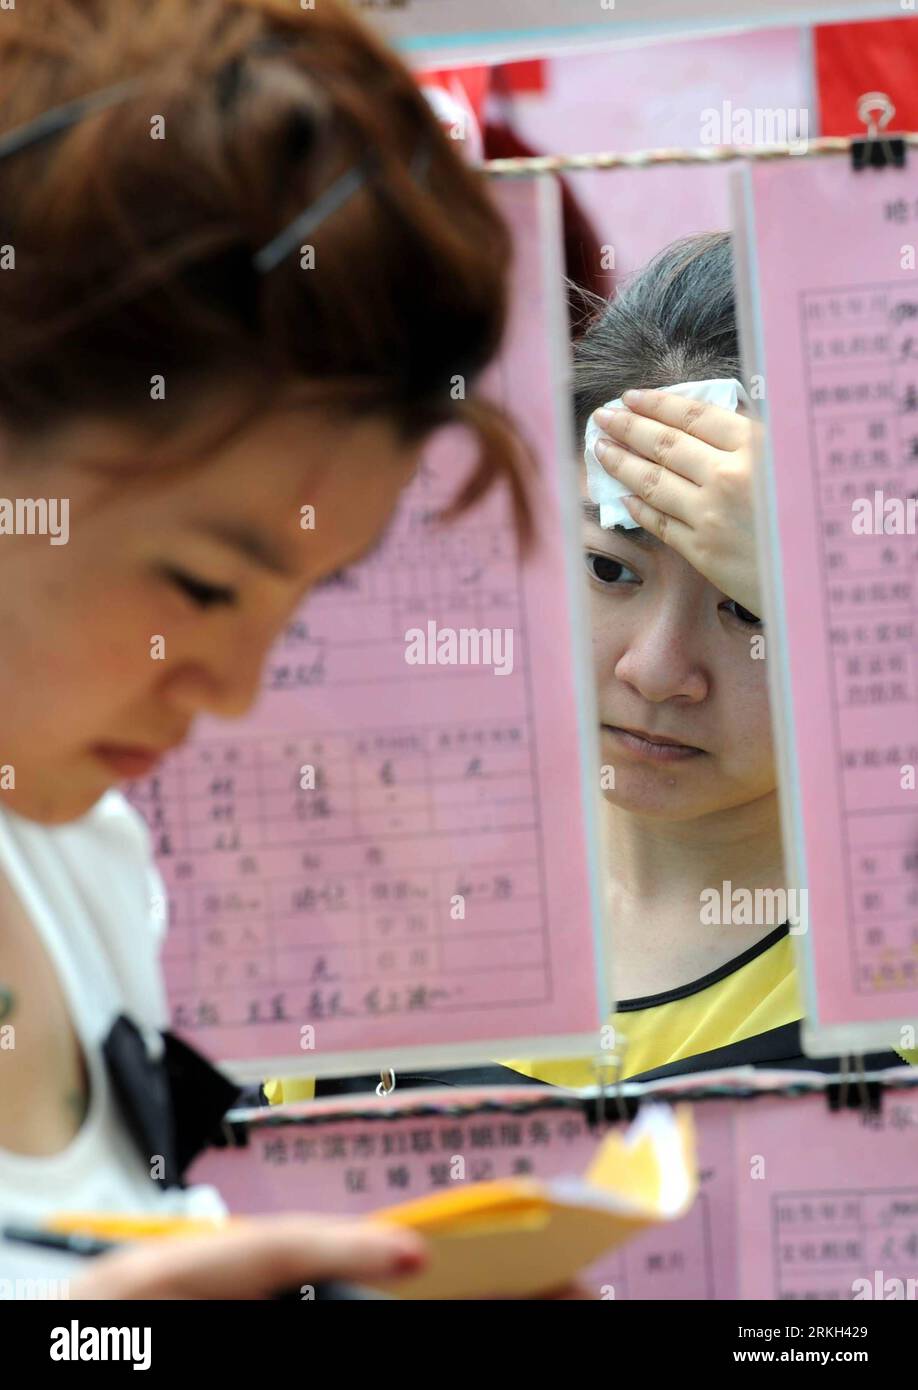 Bildnummer: 55682035  Datum: 06.08.2011  Copyright: imago/Xinhua (110806) -- HARBIN, Aug. 6, 2011 (Xinhua) -- A young woman reads information on male participants personal details to look for prospective mate in a park in Harbin, capital of northeast China s Heilongjiang Province, Aug. 6, 2011. A large-scale matchmaking party was held purposely on the Qixi Festival, or Chinese Valentine s Day, which falls on Aug. 6 this year. (Xinhua/Wang Song) (ry) CHINA-HARBIN-CHINESE VALENTINE S DAY (CN) PUBLICATIONxNOTxINxCHN Gesellschaft Partnerbörse Singlebörse Single Partnersuche Partnervermittlung Kont Stock Photo